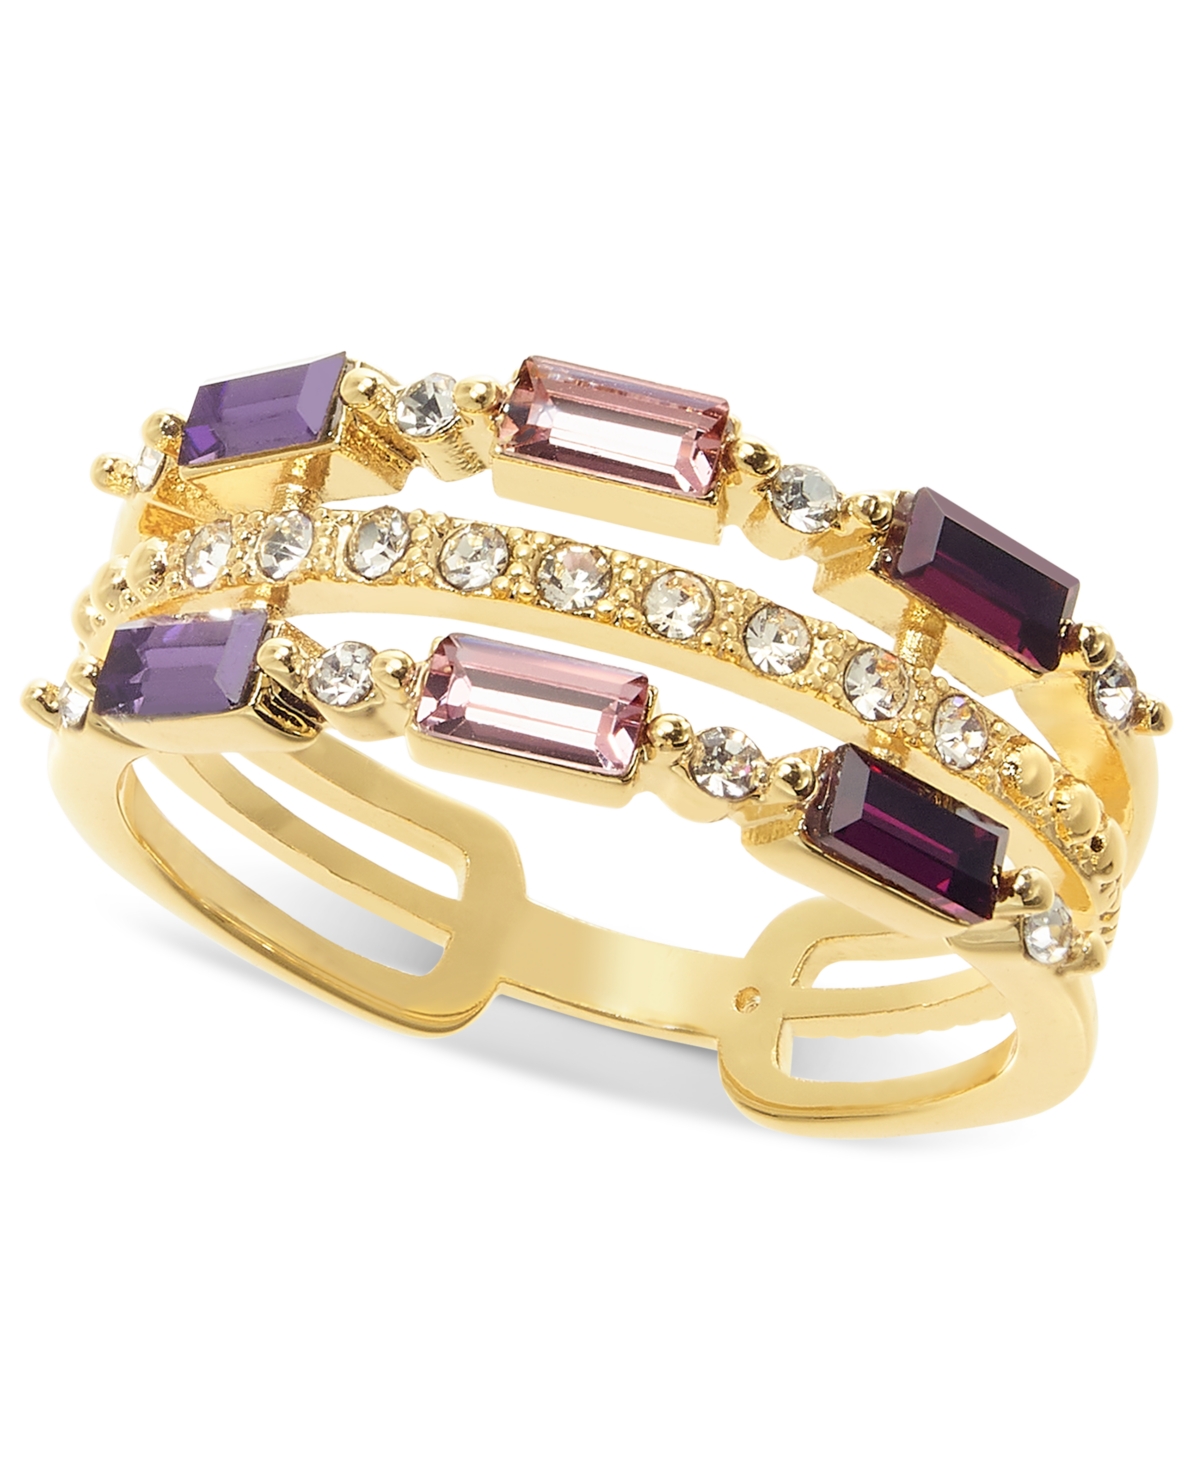 Gold-Tone Purple Stone Multi Row Ring, Created for Macy's - Gold